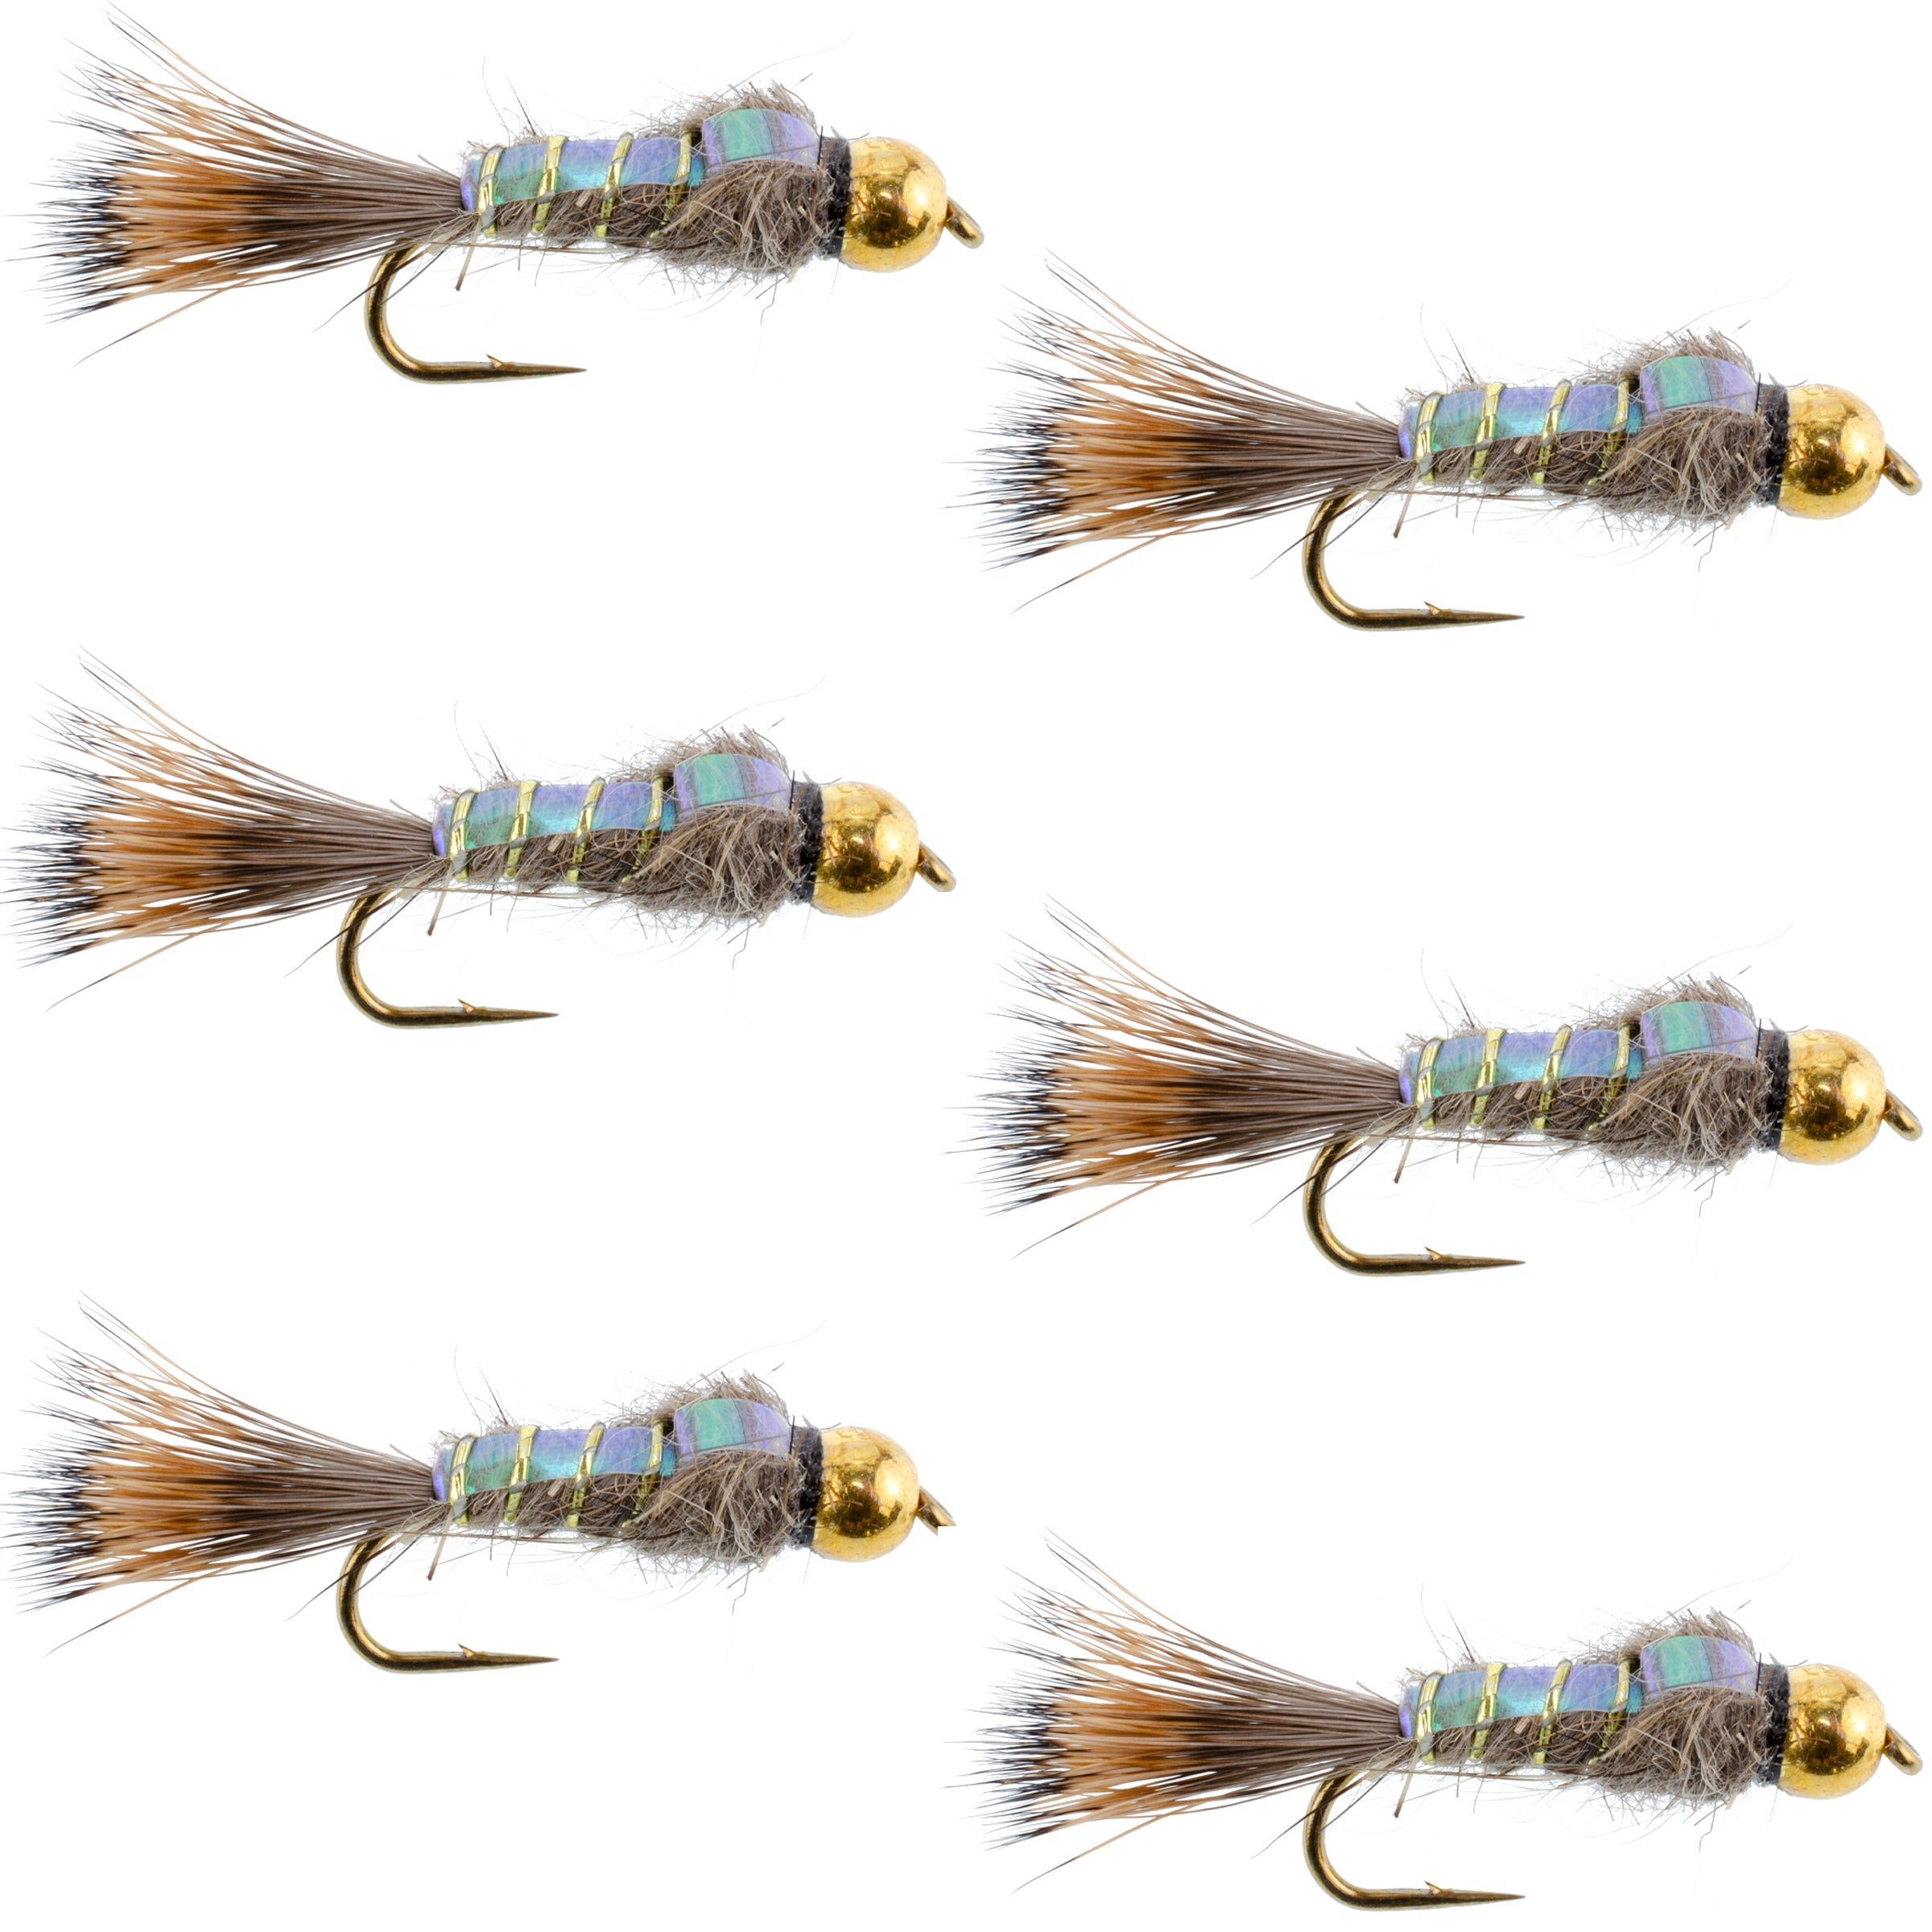 Bead Head Nymph Fly Fishing Flies - Flashback Gold Ribbed Hare's Ear Trout Fly - Nymph Wet Fly - 6 Flies Hook Size 18